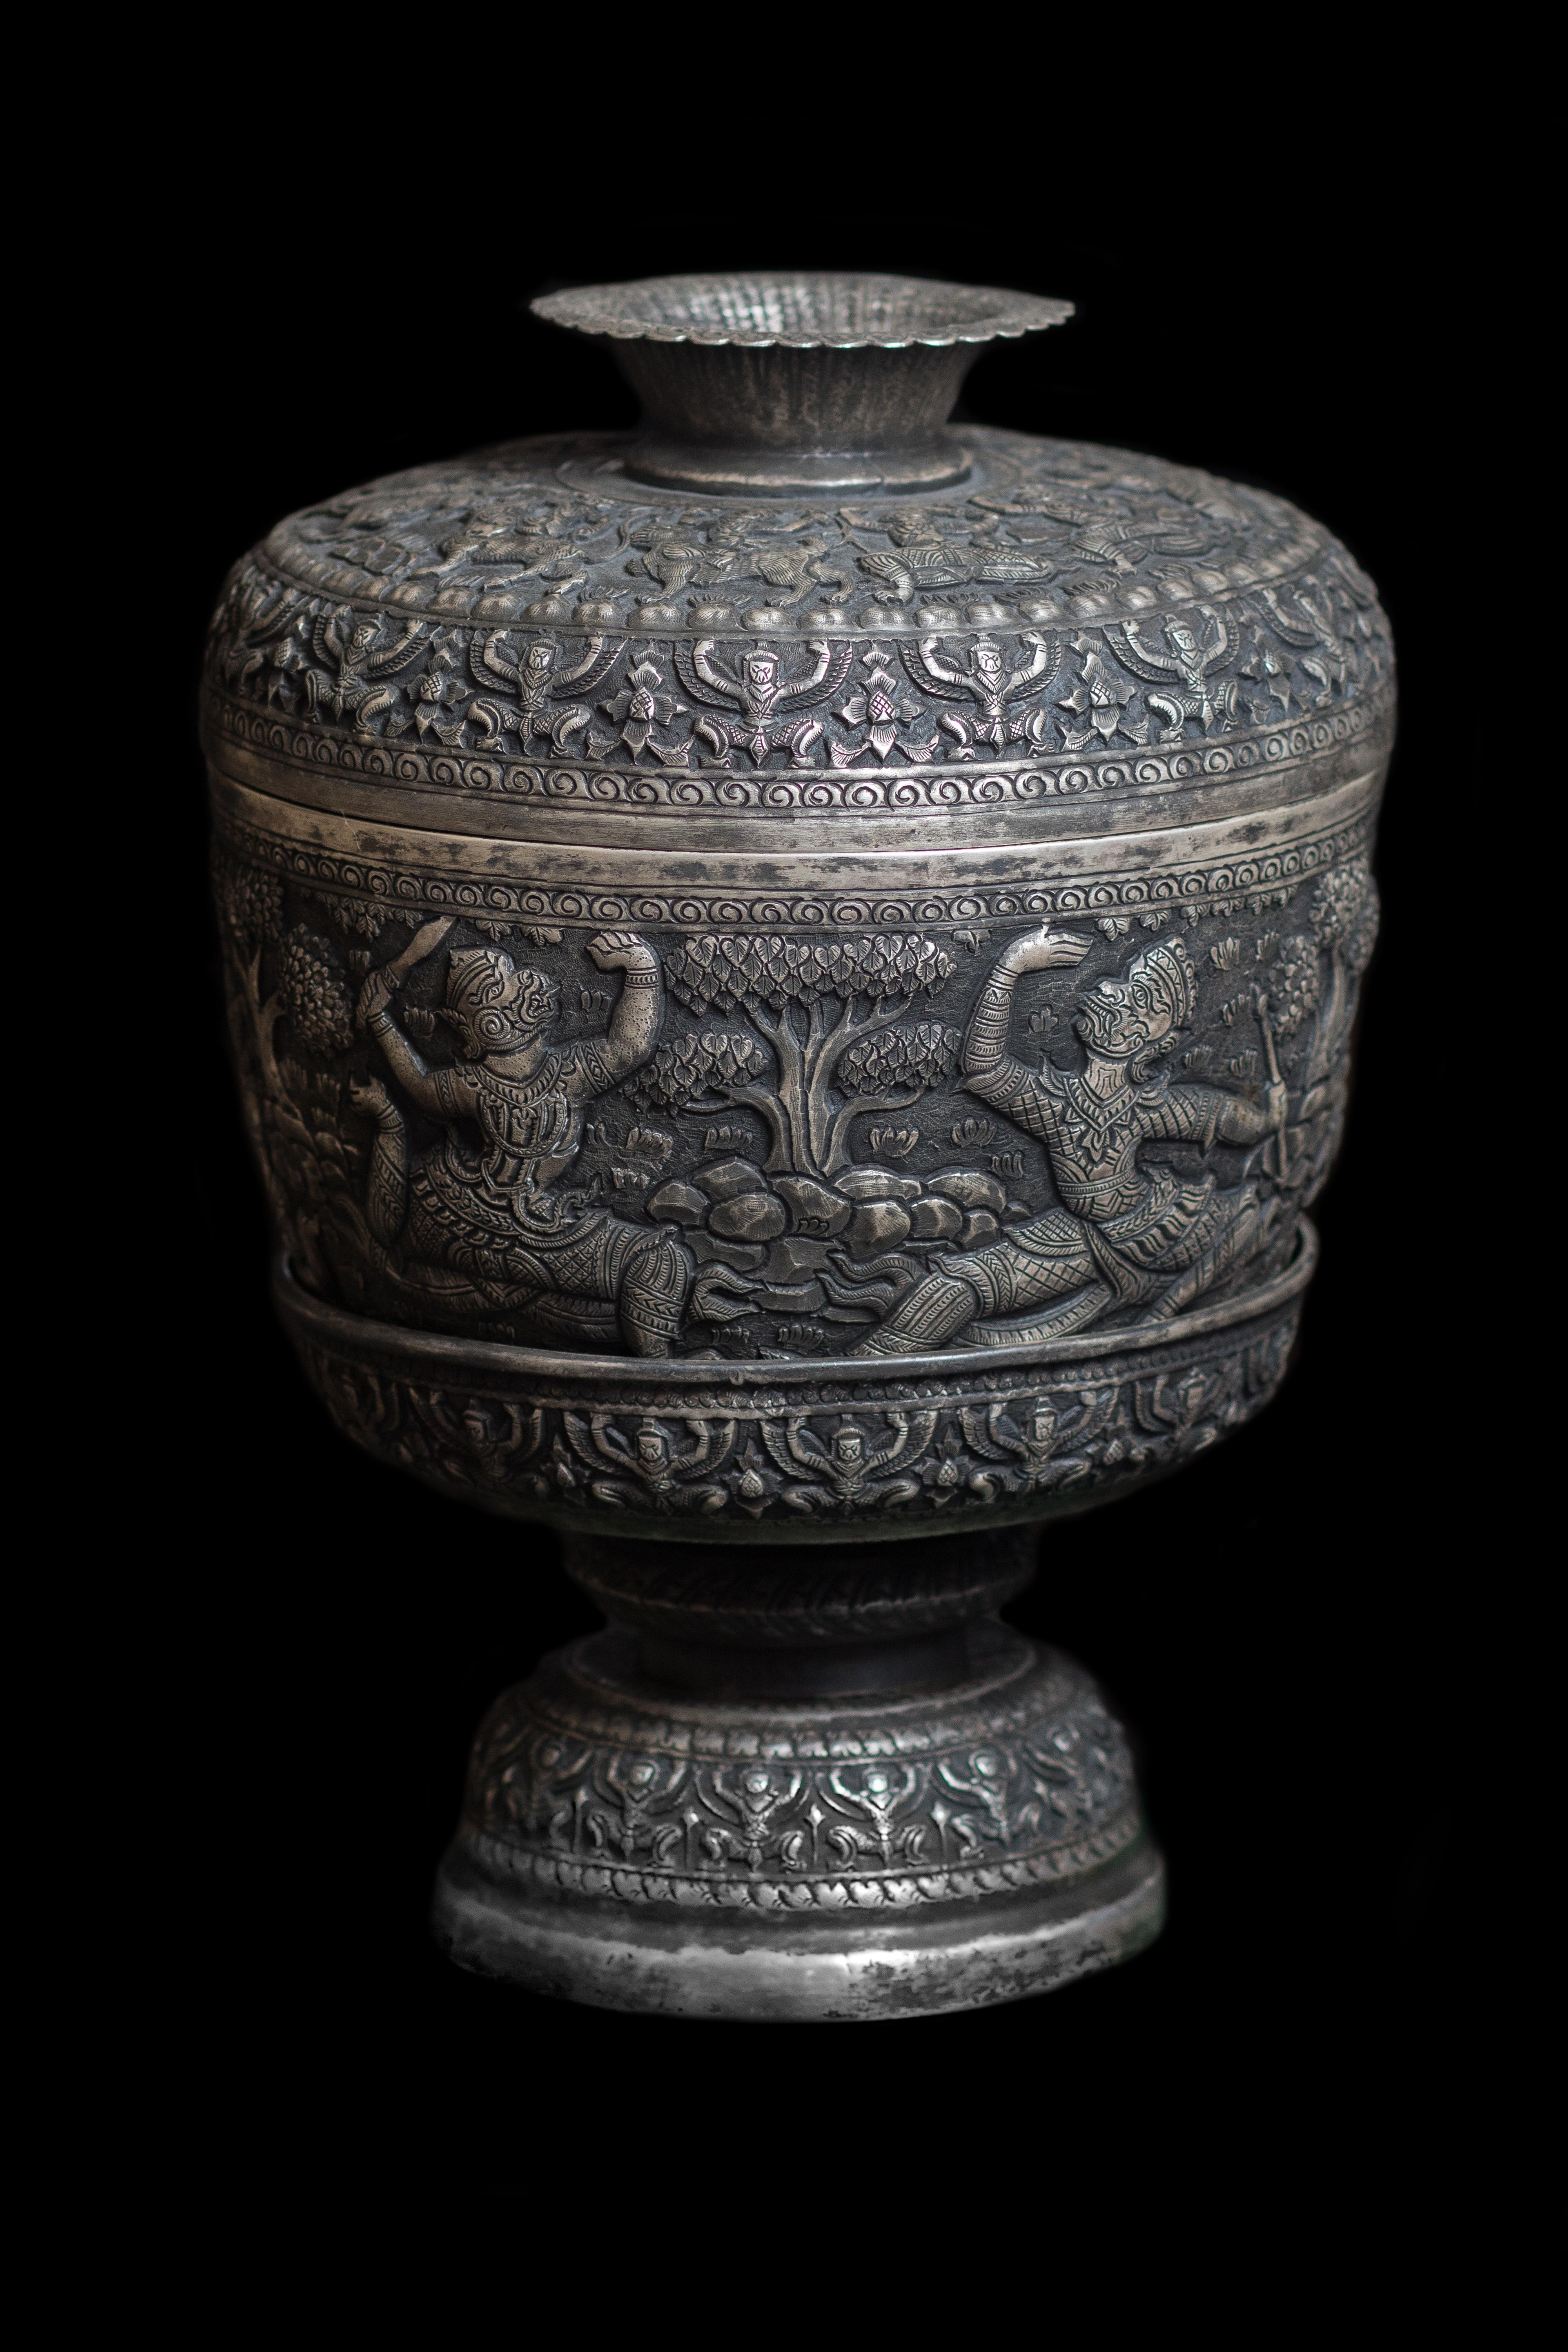 Rice Bowl and Wine Cup 18th/19th century - Old Masters Sculpture by Unknown